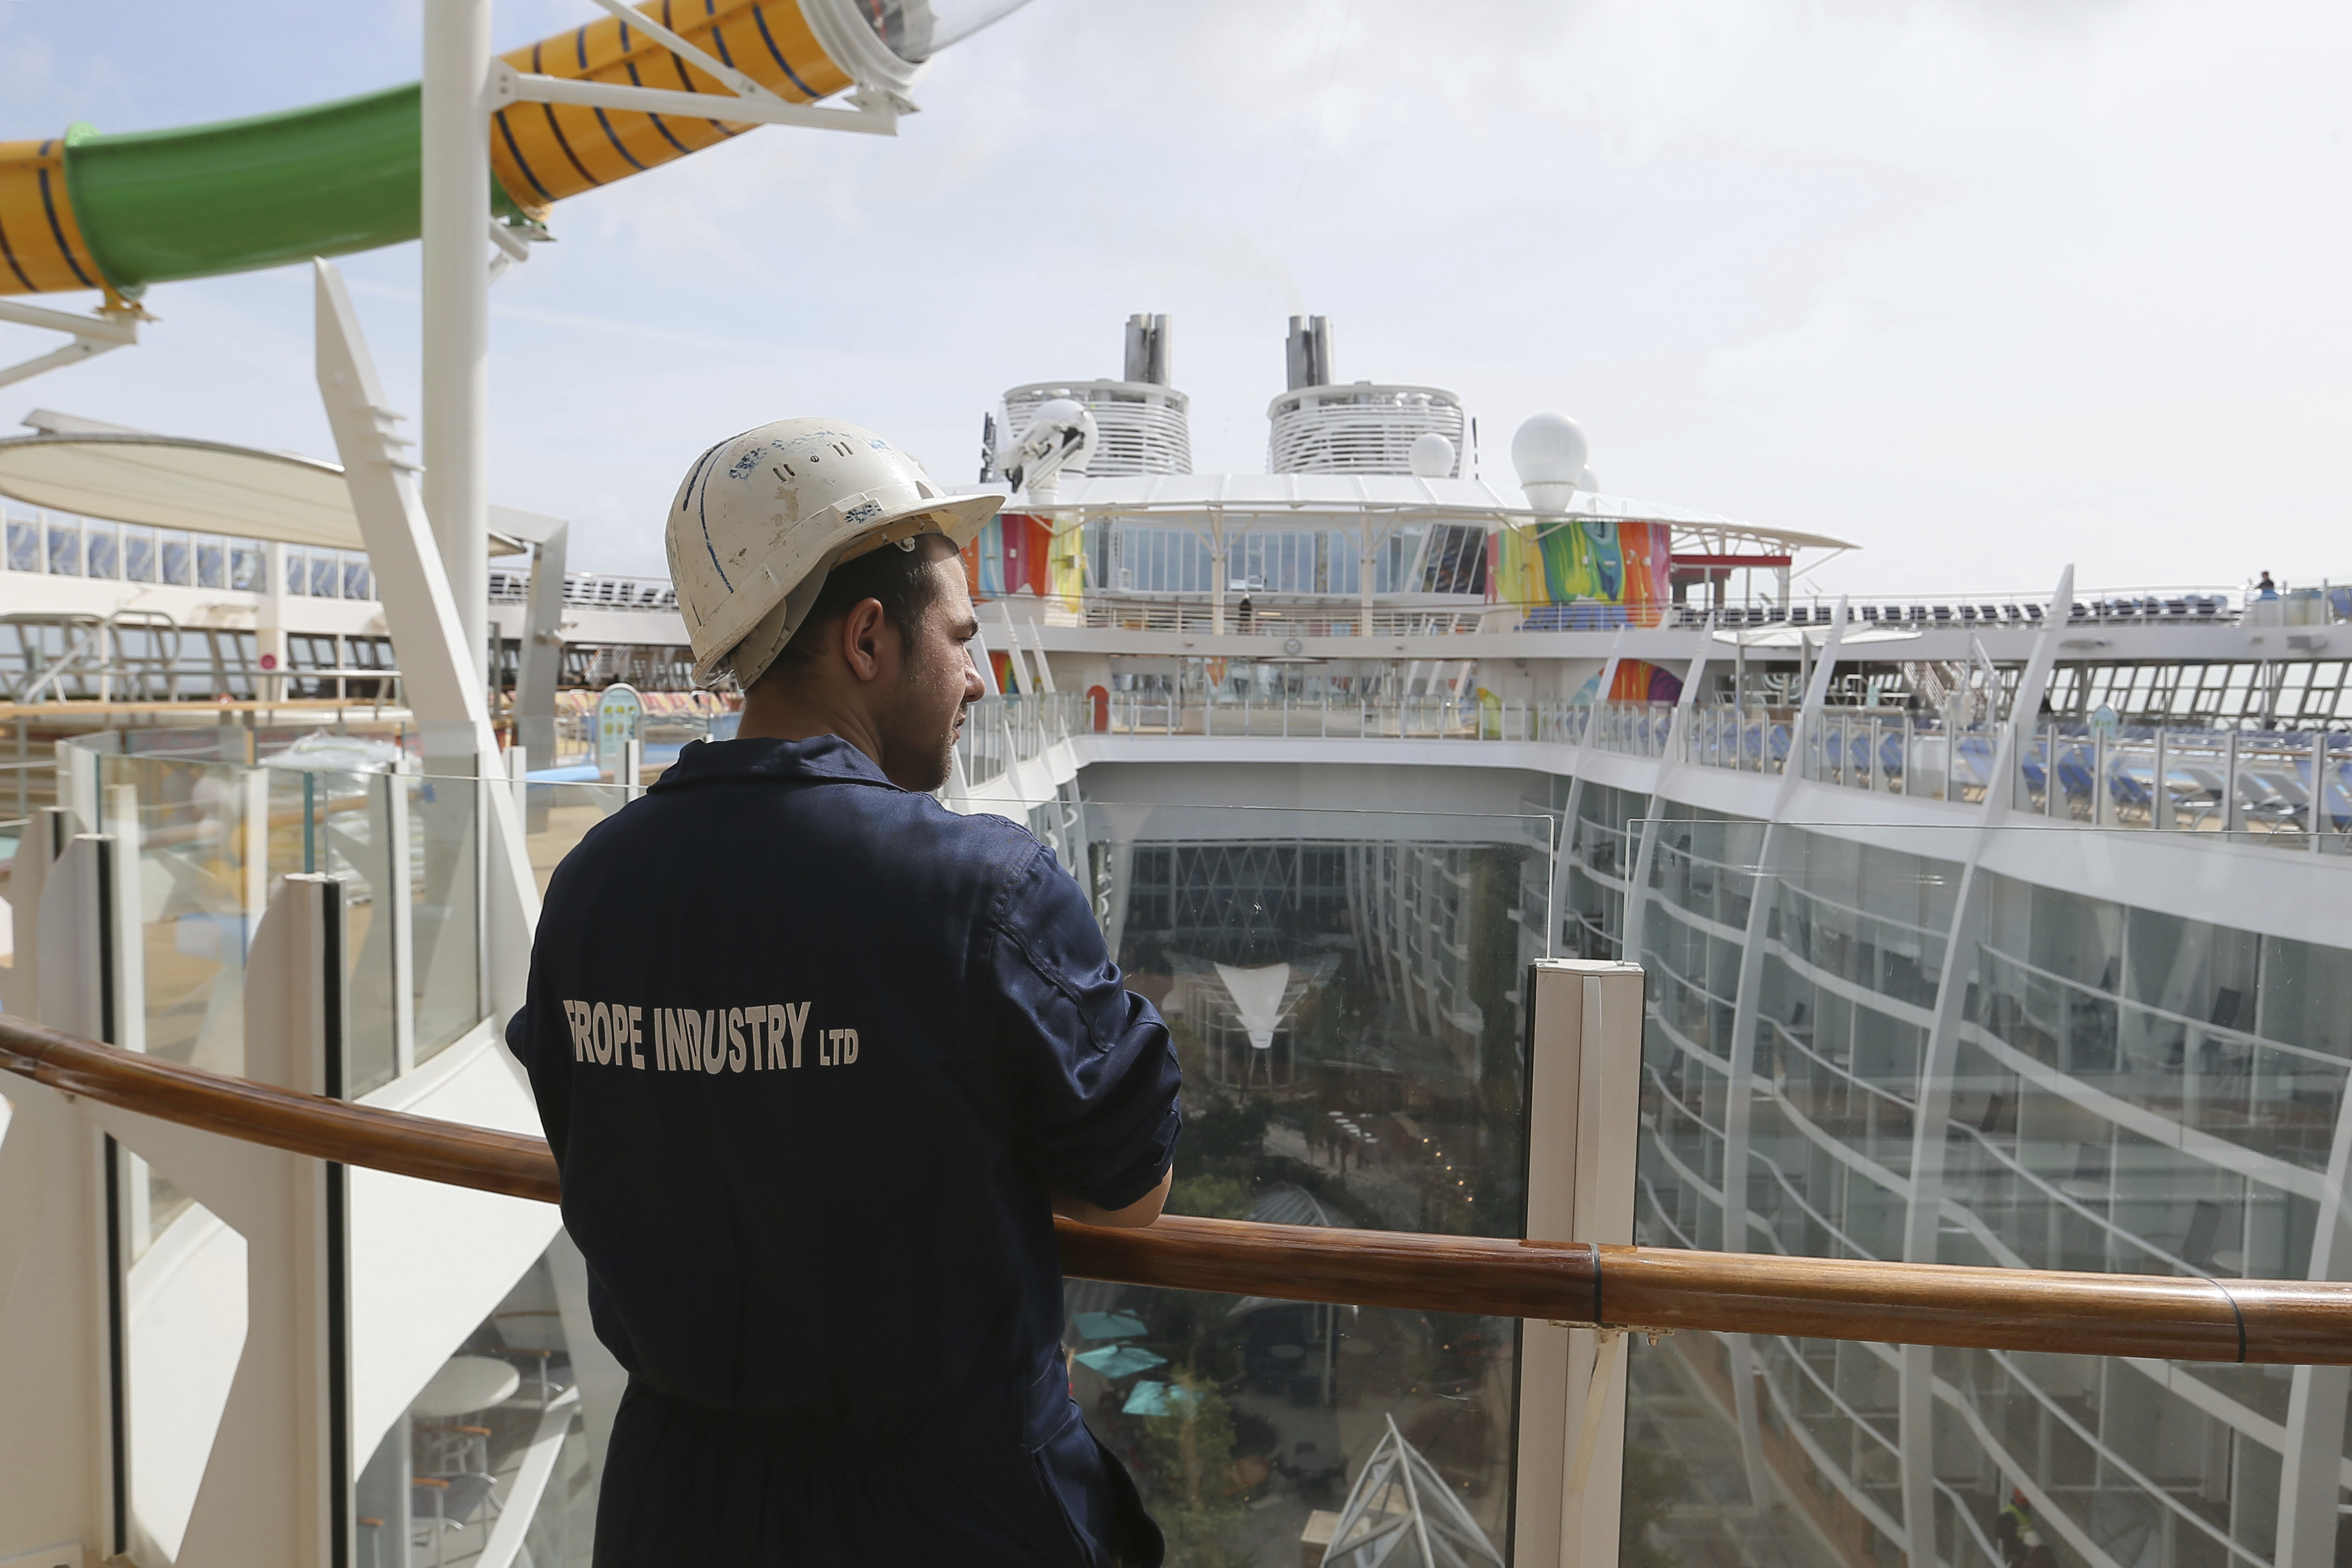 A worker watches The Symphony of the Seas, the world's largest cruise ship, docking at Saint Nazaire port, western France, Friday, March 23, 2018. Royal Caribbean International took delivery of the much-awaited, 228,081-ton Symphony of the Seas from the French shipyard STX. (AP Photo/David Vincent)